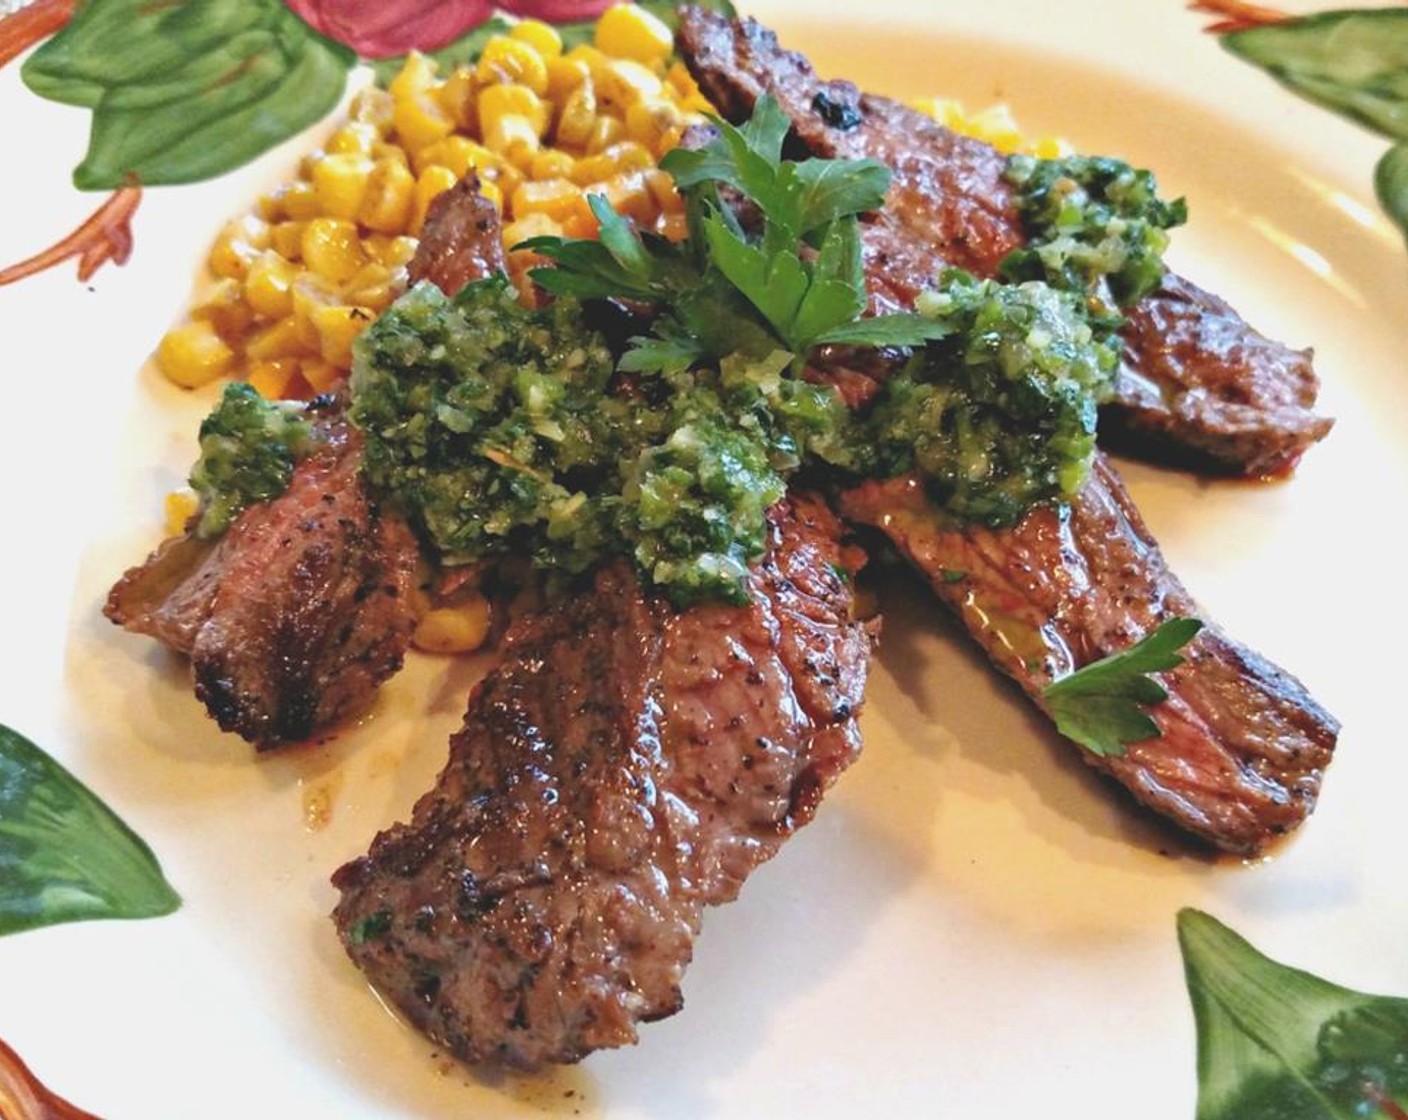 step 10 Once your beef has rested, cut it across the grain and serve with chimichurri and a few fresh springs of cilantro or flat-leaf parsley for presentation. Serve and enjoy!